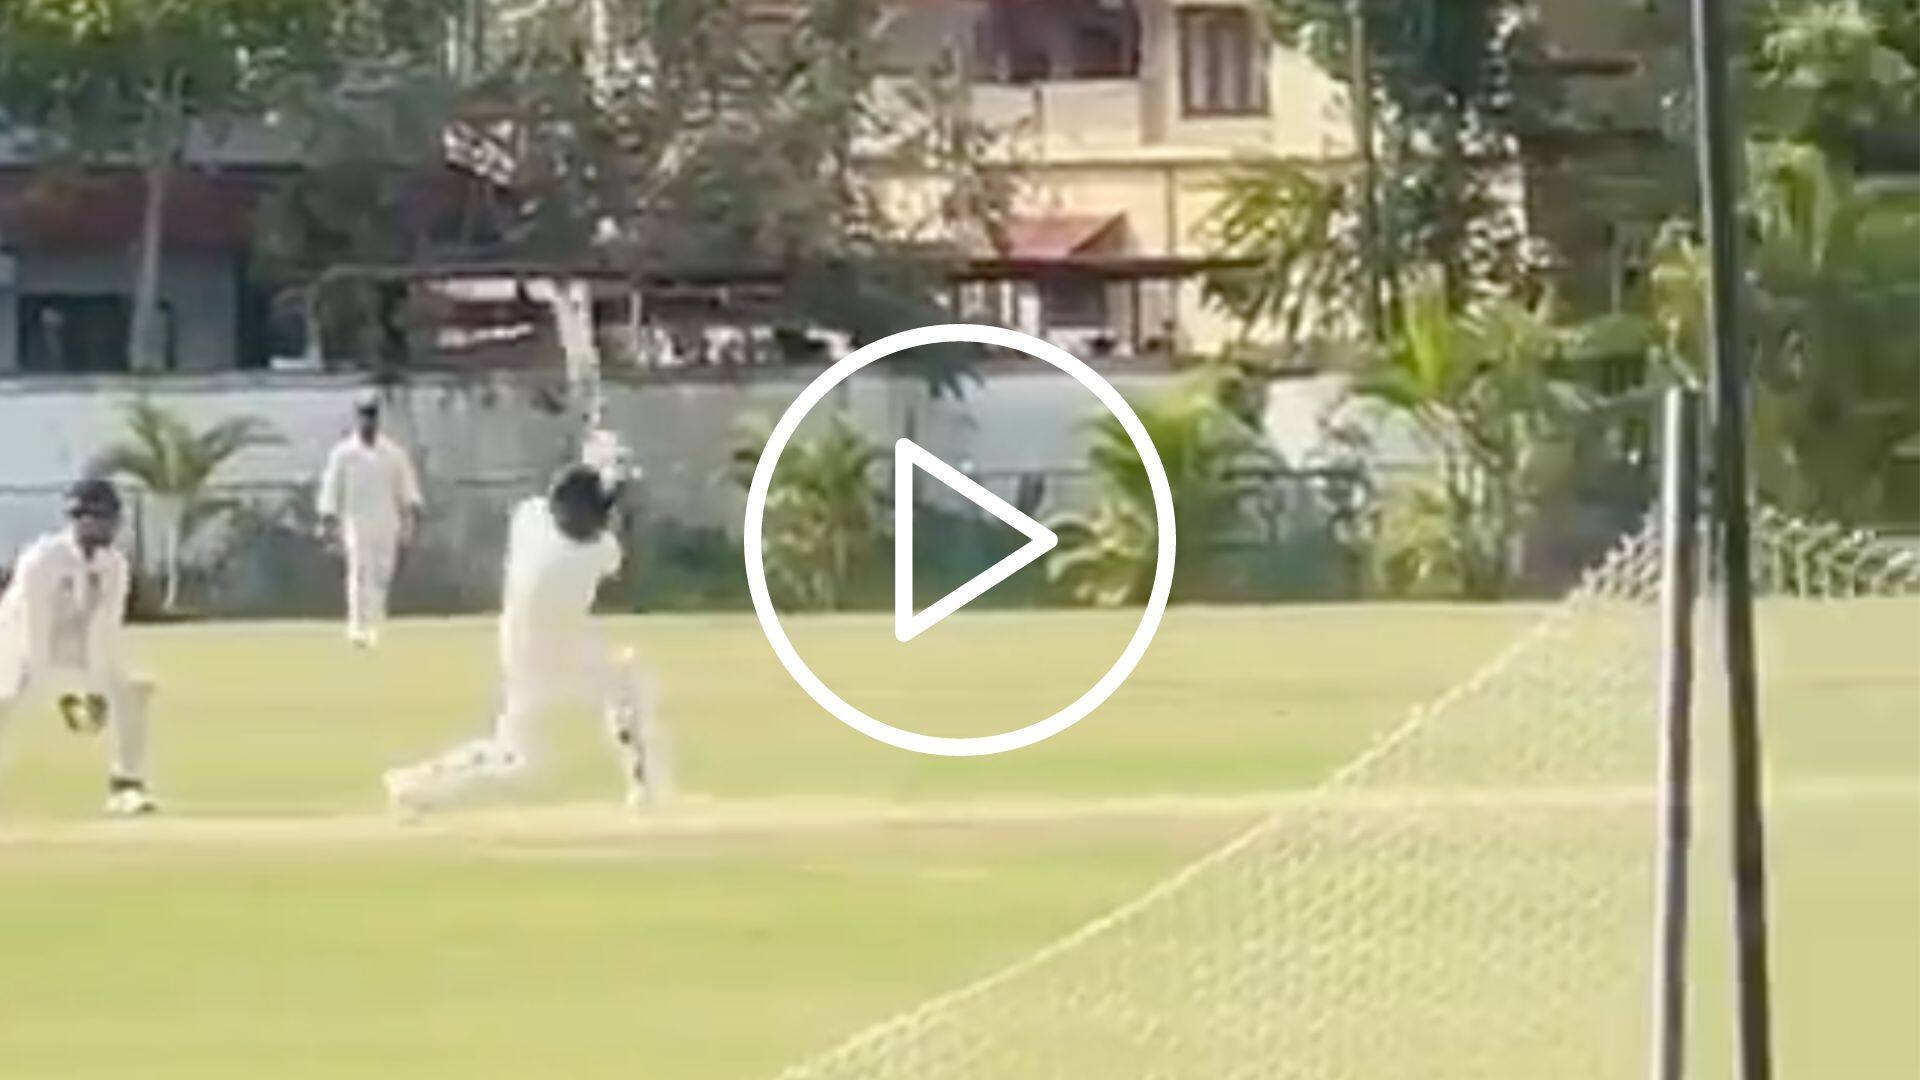 [Watch] Sanju Samson Launches 'First-Ball Six' Against Rinku Singh's UP In Ranji Trophy 